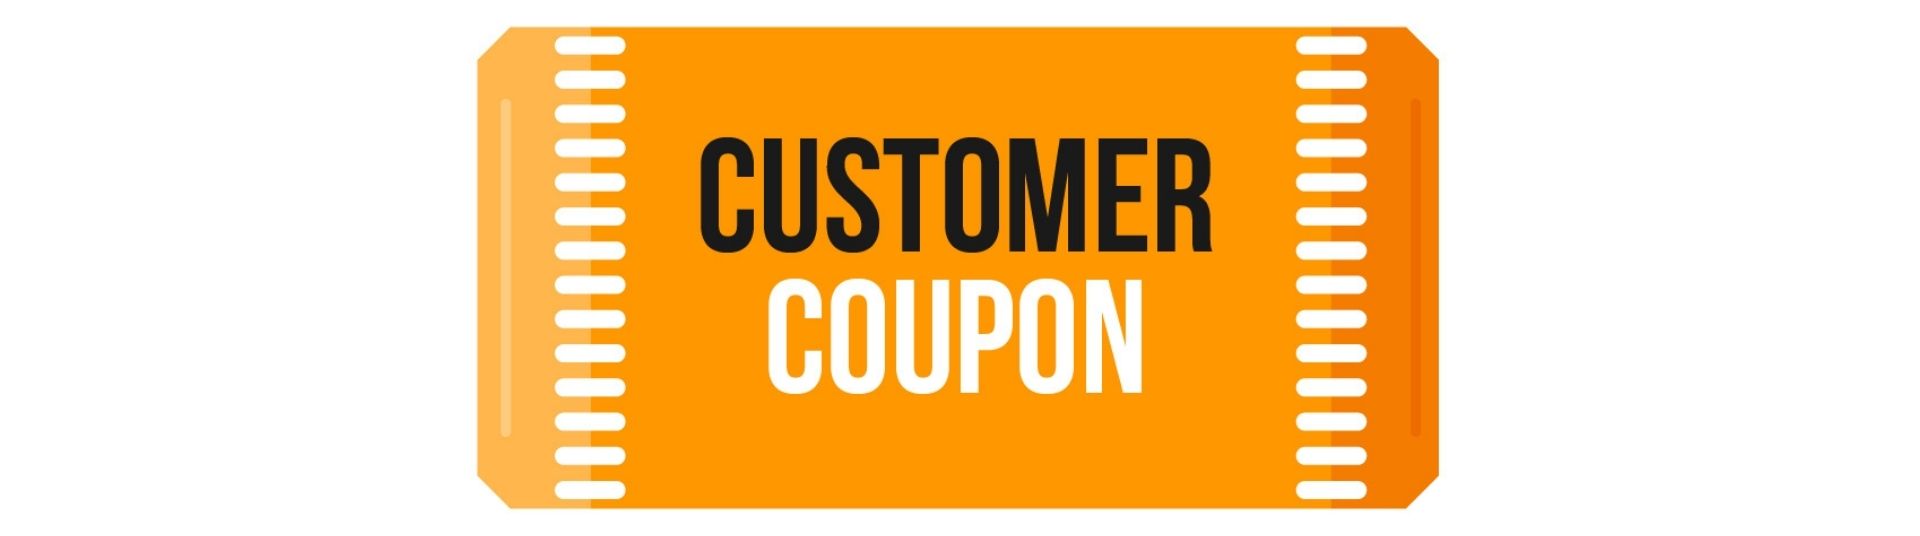 all-about-coupon-discount-and-how-to-improve-your-coupon-marketing